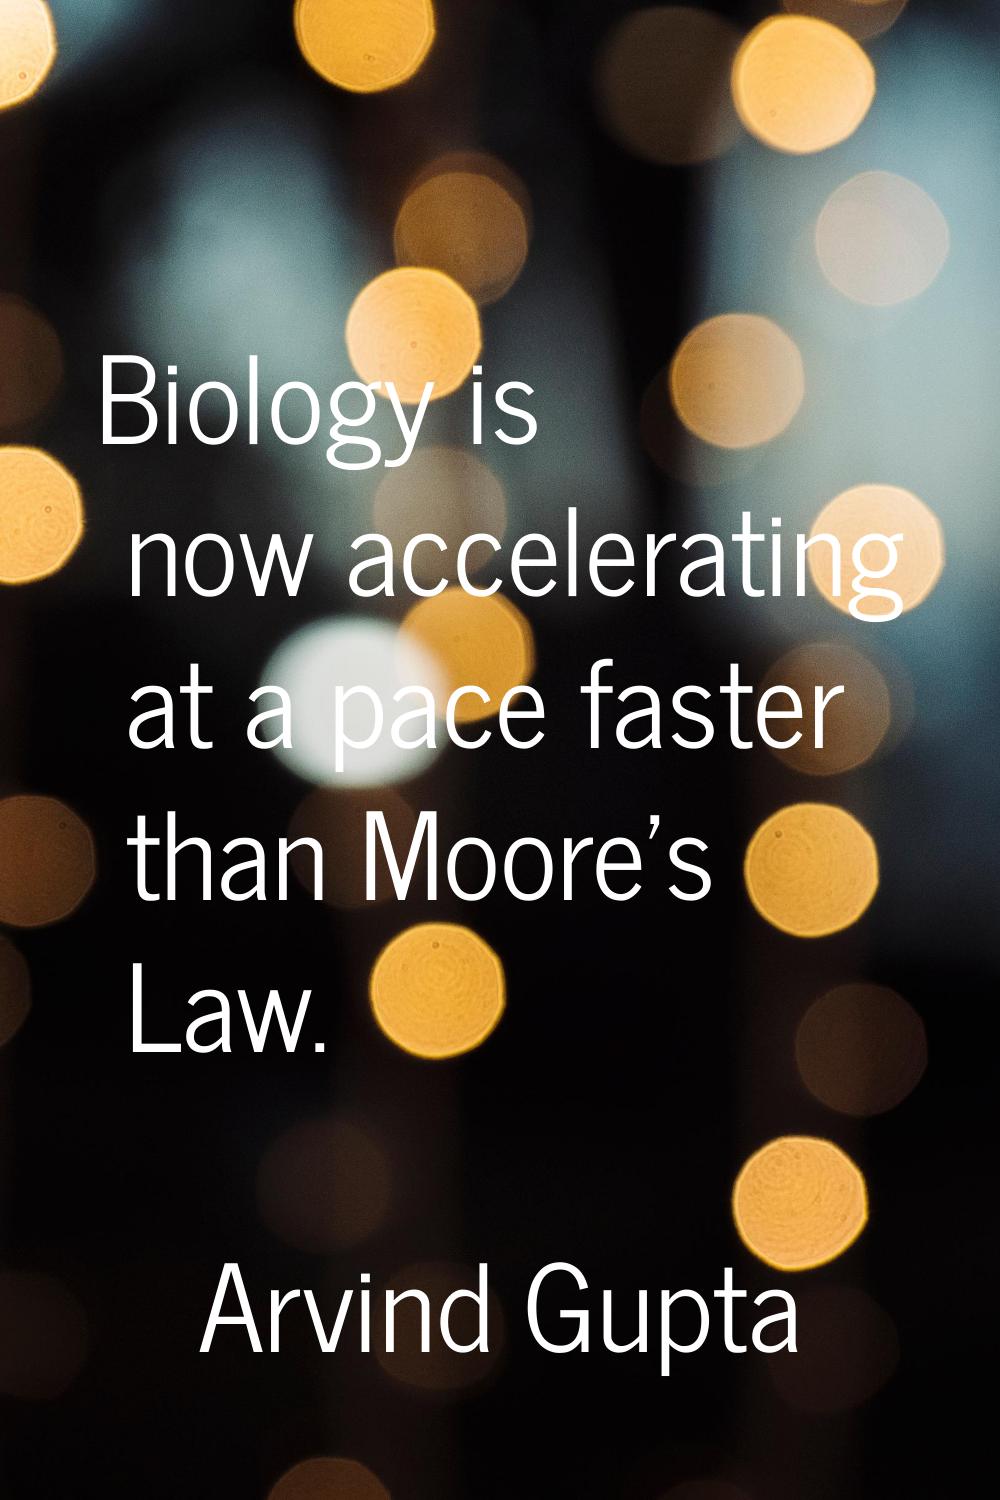 Biology is now accelerating at a pace faster than Moore's Law.